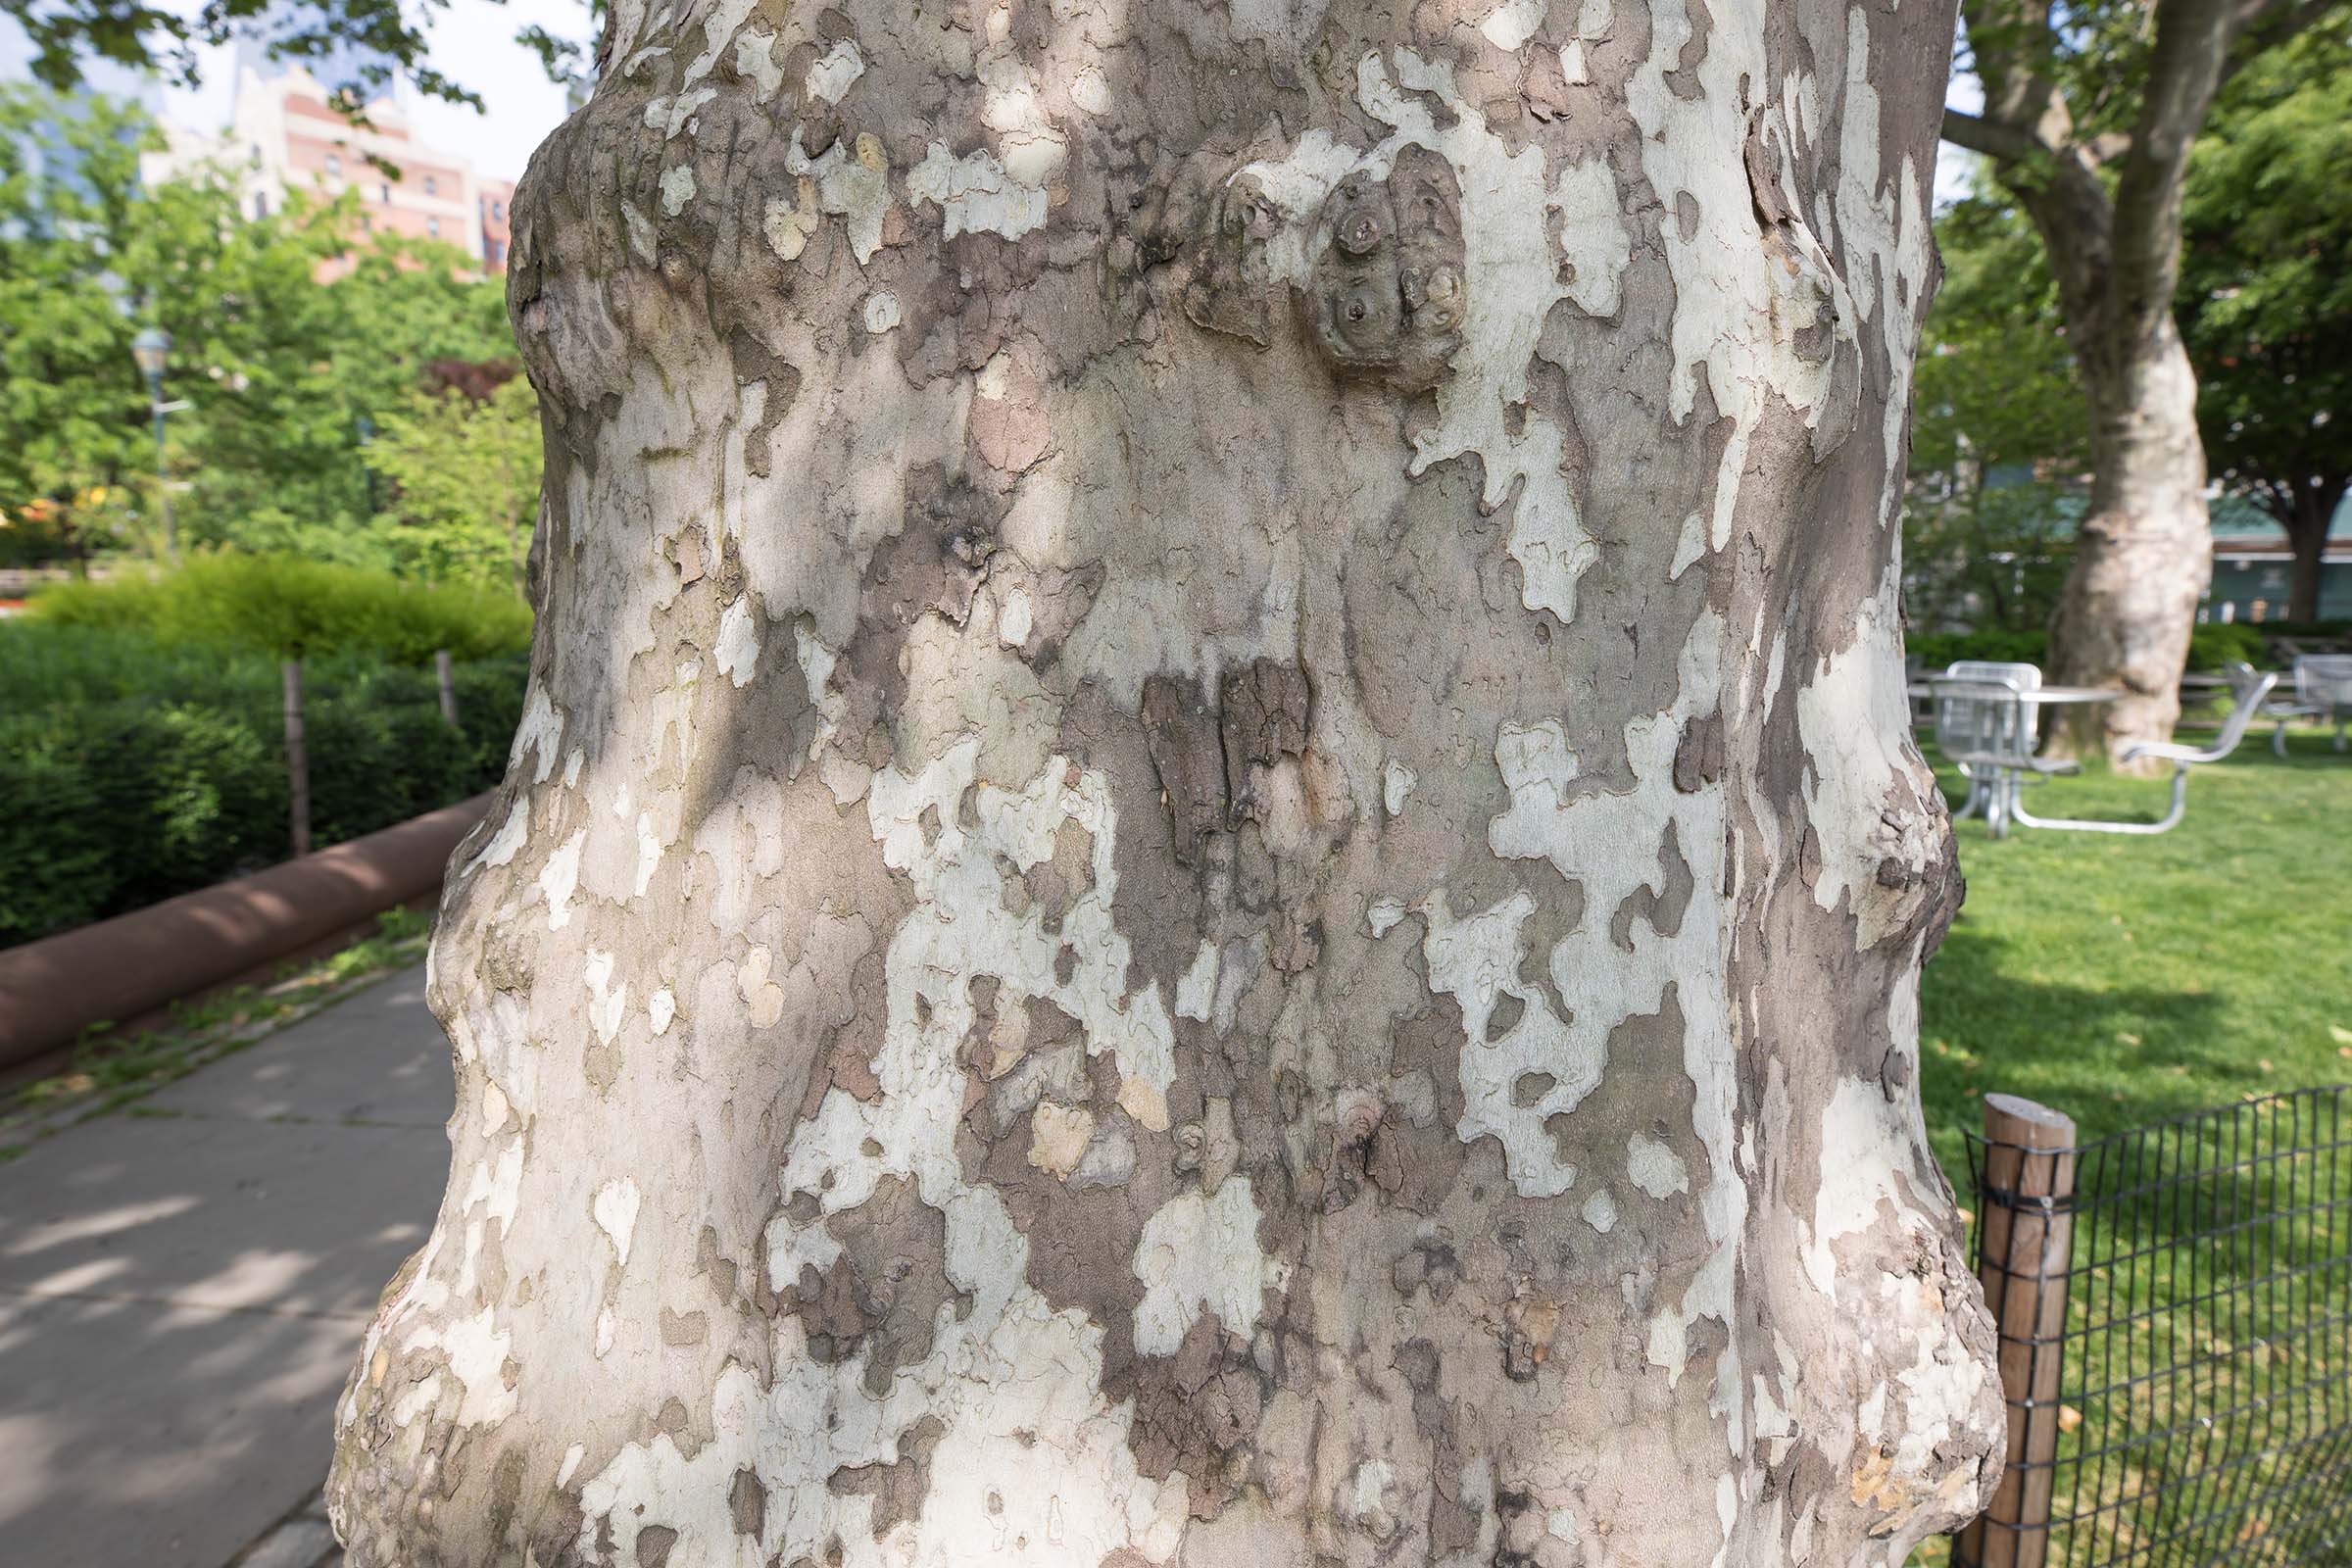 • Plane trees have brilliant cream, olive, and light brown bark